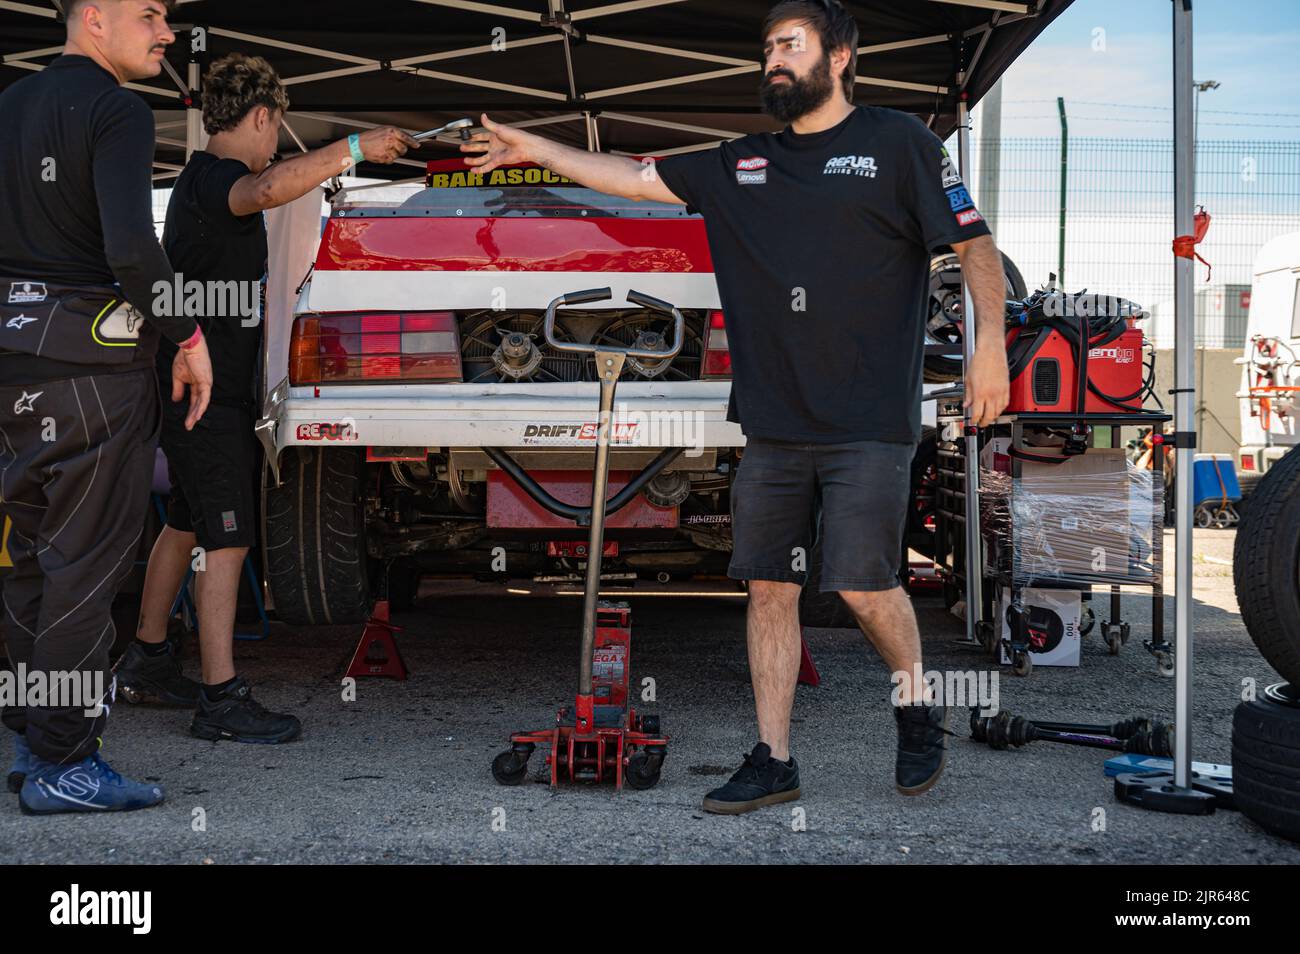 The BMW E30 in pits, mechanics have raised the car with the jack to change the bearings and axles Stock Photo